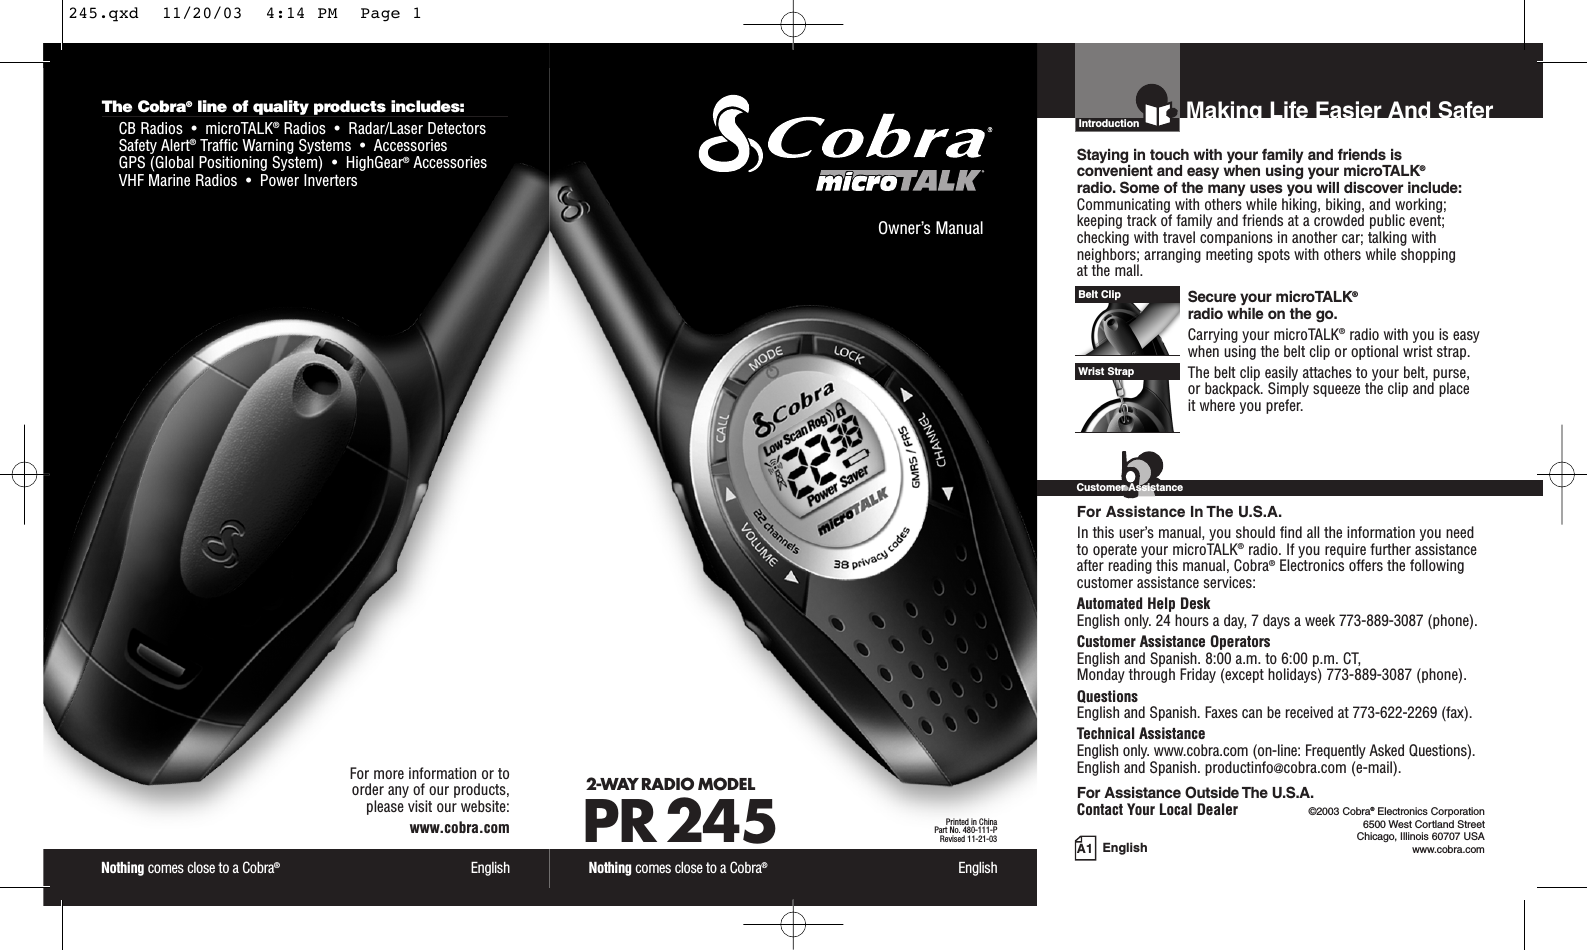 The Cobra®line of quality products includes:CB Radios  •  microTALK®Radios  •  Radar/Laser Detectors Safety Alert®Traffic Warning Systems  •  Accessories GPS (Global Positioning System)  •  HighGear®Accessories  VHF Marine Radios  •  Power InvertersEnglishA1Nothing comes close to a Cobra®EnglishFor more information or to order any of our products, please visit our website:www.cobra.comOwner’s ManualNothing comes close to a Cobra®English2-WAY RADIO MODEL PR 245 Printed in ChinaPart No. 480-111-PRevised 11-21-03Introduction©2003 Cobra®Electronics Corporation6500 West Cortland StreetChicago, Illinois 60707 USAwww.cobra.comMaking Life Easier And SaferStaying in touch with your family and friends is convenient and easy when using your microTALK®radio. Some of the many uses you will discover include:Communicating with others while hiking, biking, and working;keeping track of family and friends at a crowded public event;checking with travel companions in another car; talking withneighbors; arranging meeting spots with others while shopping at the mall.Secure your microTALK®radio while on the go.Carrying your microTALK®radio with you is easywhen using the belt clip or optional wrist strap. The belt clip easily attaches to your belt, purse, or backpack. Simply squeeze the clip and place it where you prefer.For Assistance In The U.S.A.In this user’s manual, you should find all the information you needto operate your microTALK®radio. If you require further assistanceafter reading this manual, Cobra®Electronics offers the followingcustomer assistance services:Automated Help Desk English only. 24 hours a day, 7 days a week 773-889-3087 (phone). Customer Assistance OperatorsEnglish and Spanish. 8:00 a.m. to 6:00 p.m. CT, Monday through Friday (except holidays) 773-889-3087 (phone). QuestionsEnglish and Spanish. Faxes can be received at 773-622-2269 (fax). Technical AssistanceEnglish only. www.cobra.com (on-line: Frequently Asked Questions). English and Spanish. productinfo@cobra.com (e-mail).For Assistance Outside The U.S.A.Contact Your Local DealerBelt ClipWrist StrapCustomer Assistance245.qxd  11/20/03  4:14 PM  Page 1